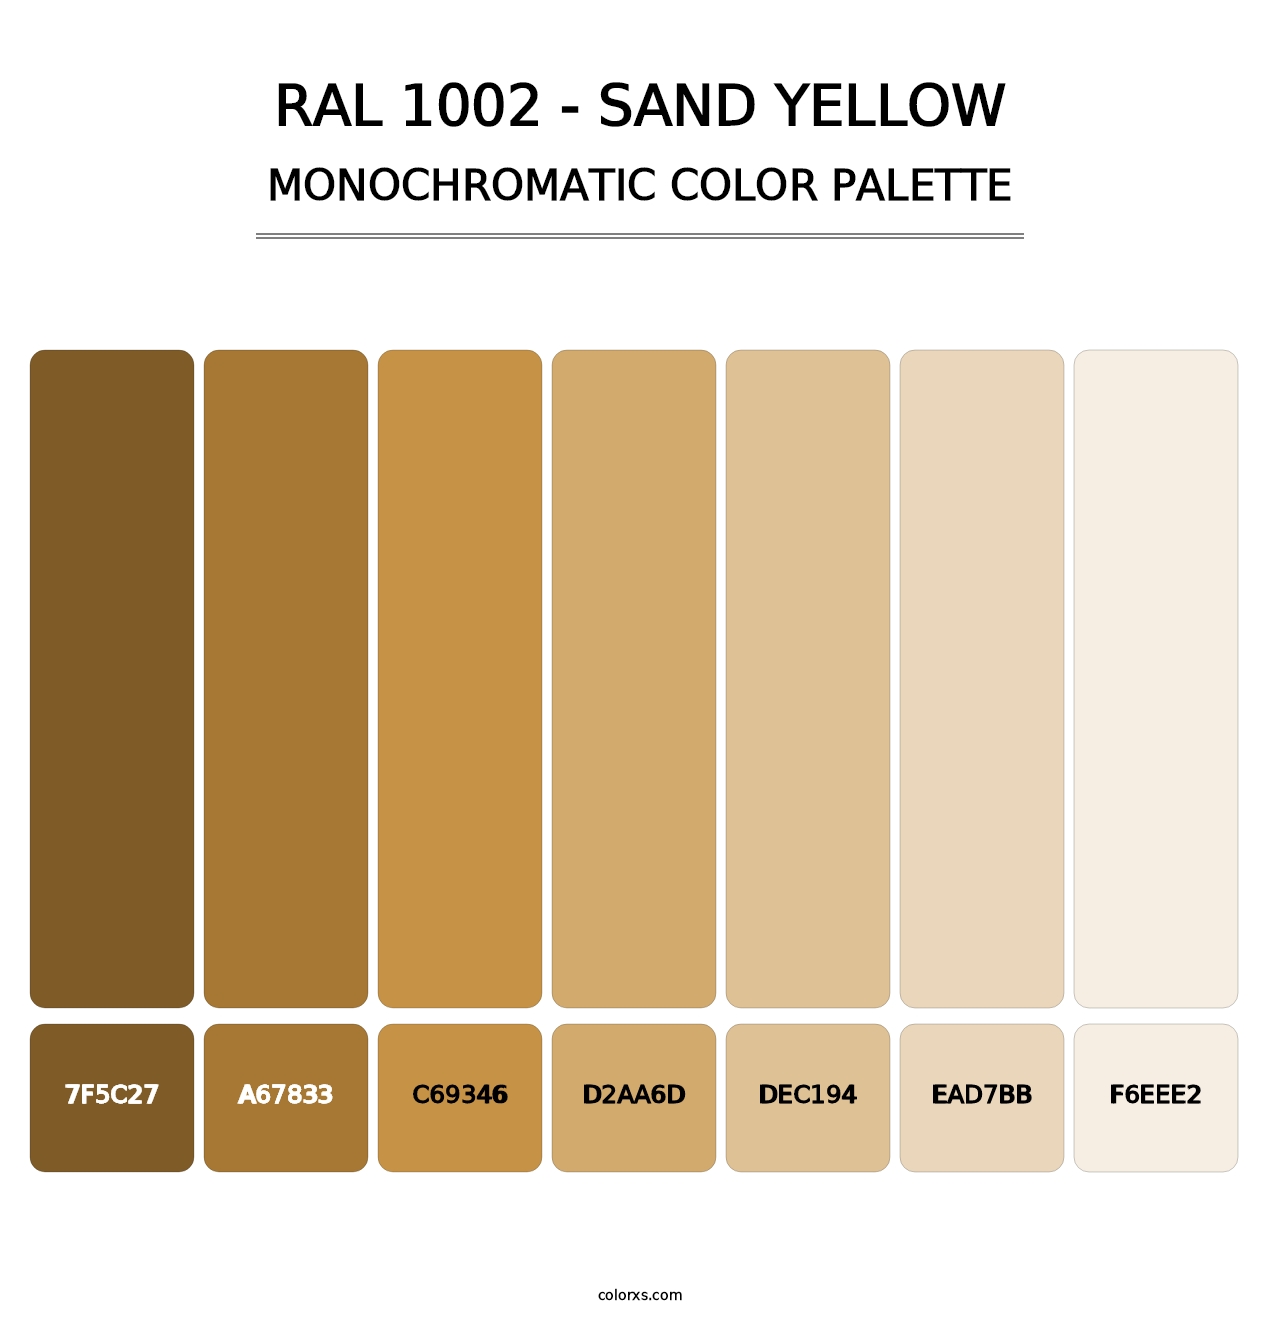 RAL 1002 - Sand Yellow - Monochromatic Color Palette